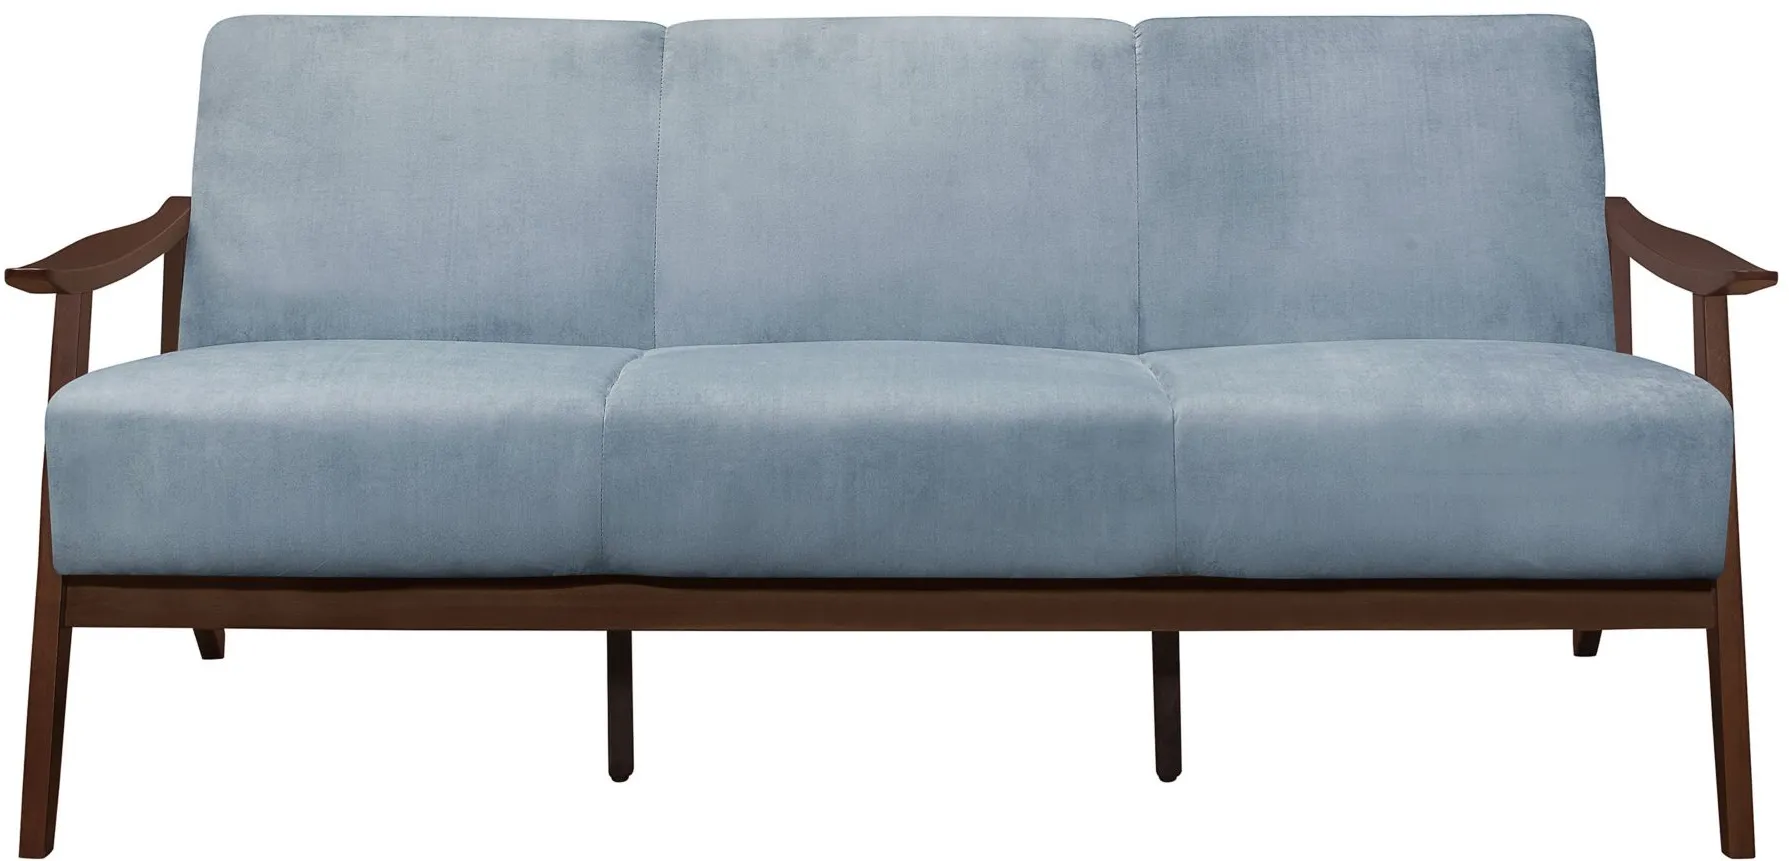 Lewiston Sofa in Blue Gray by Homelegance